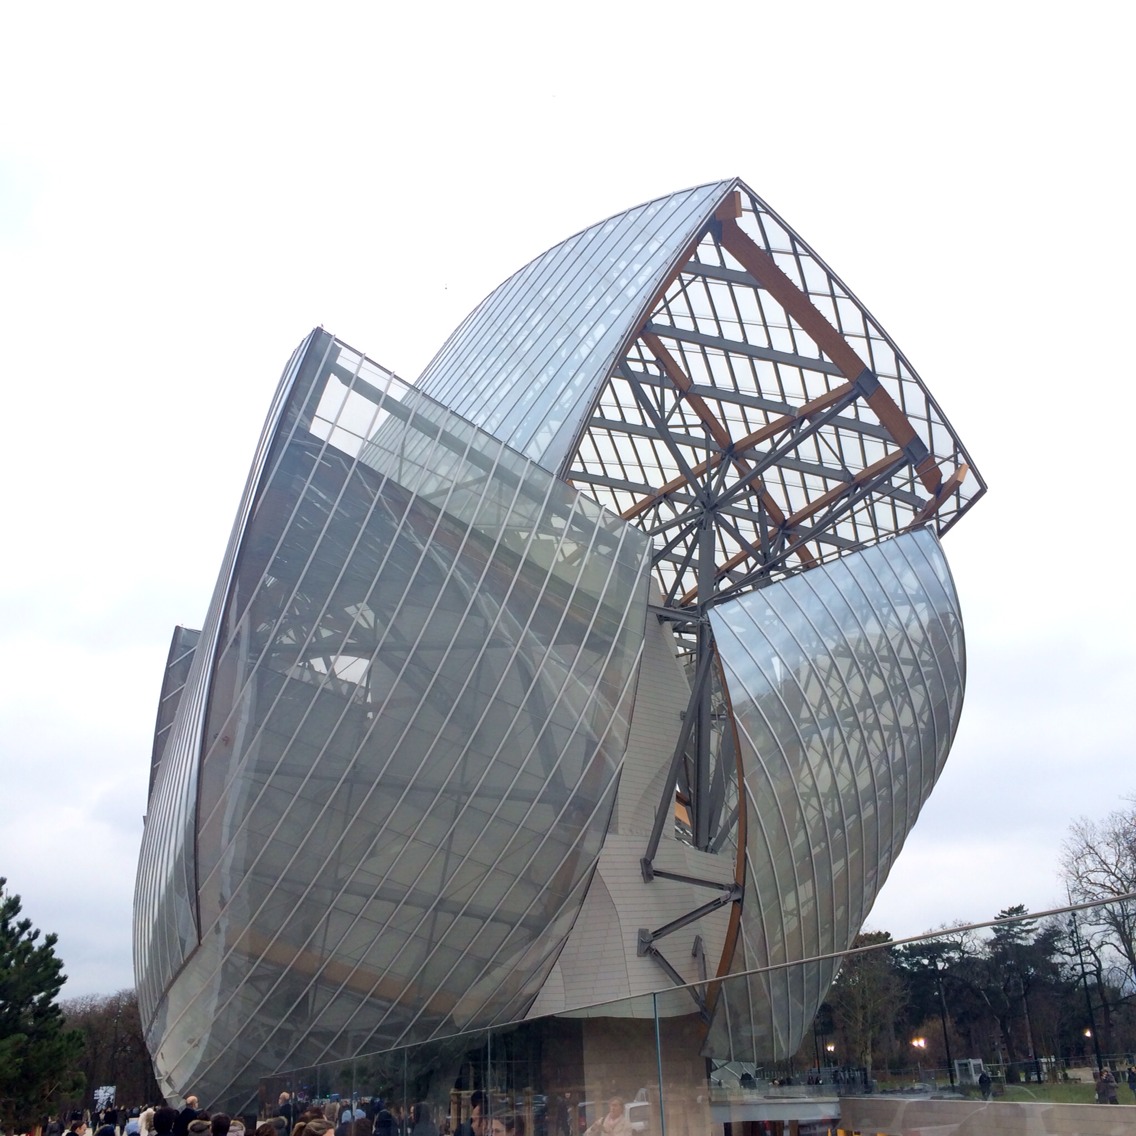 Exhibition Review: Frank Gehry and Olafur Eliasson at Fondation Louis Vuitton. | BLOKSPK